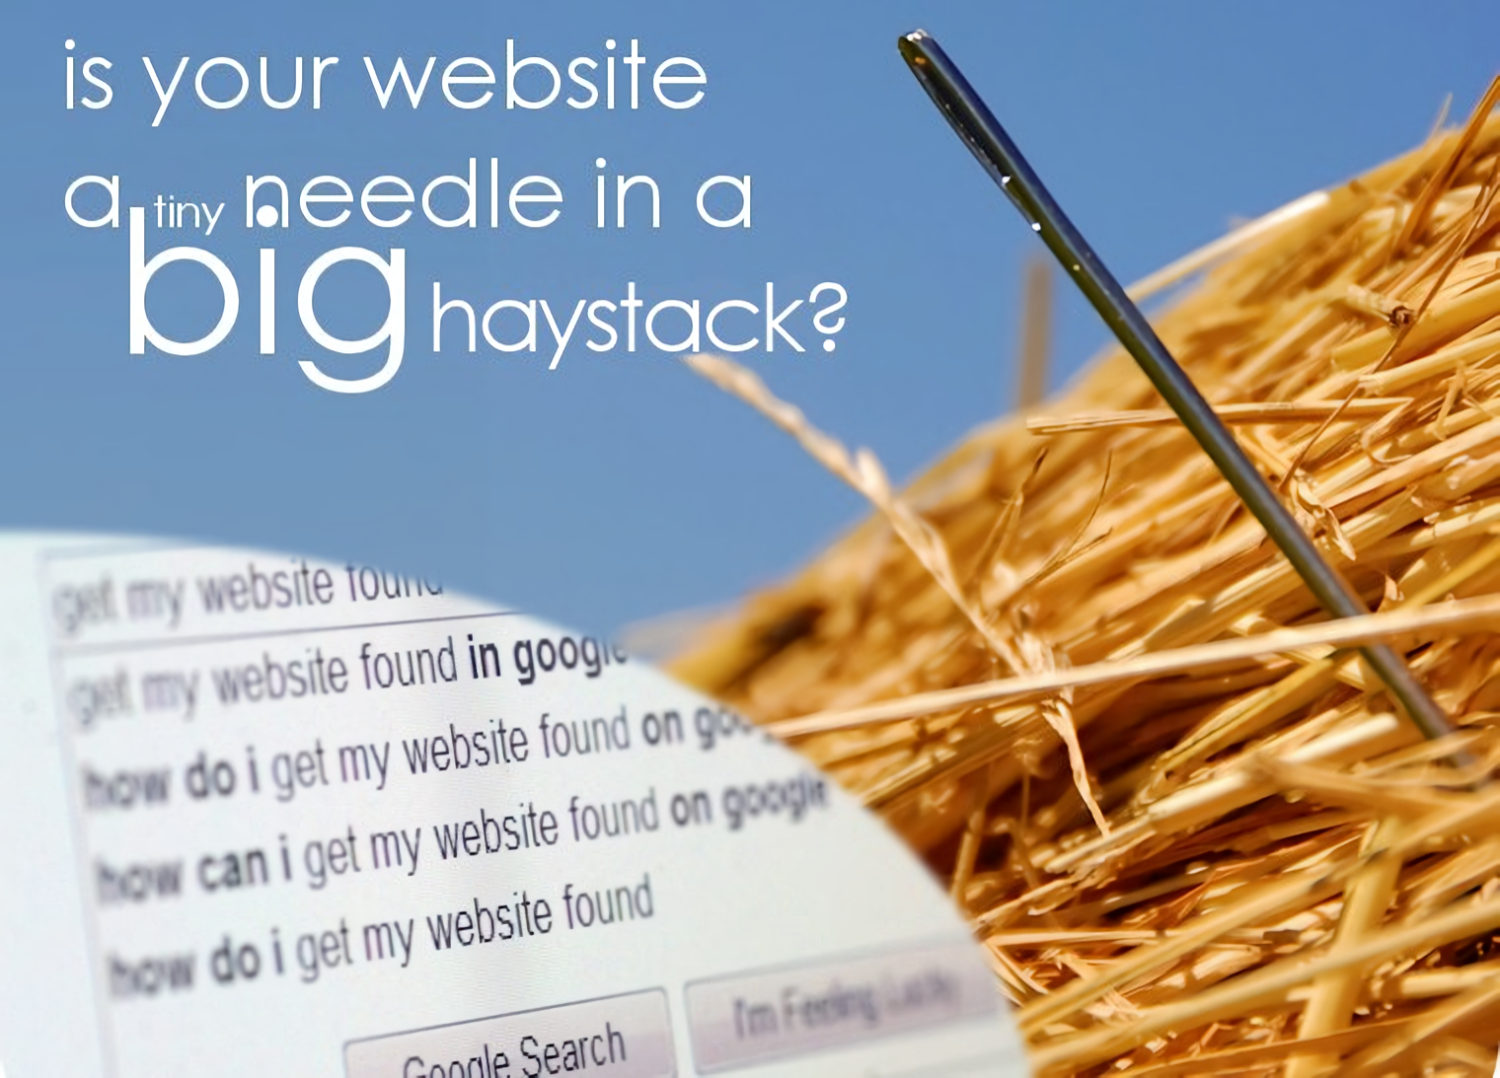 is your website a tiny needle in a big haystack?